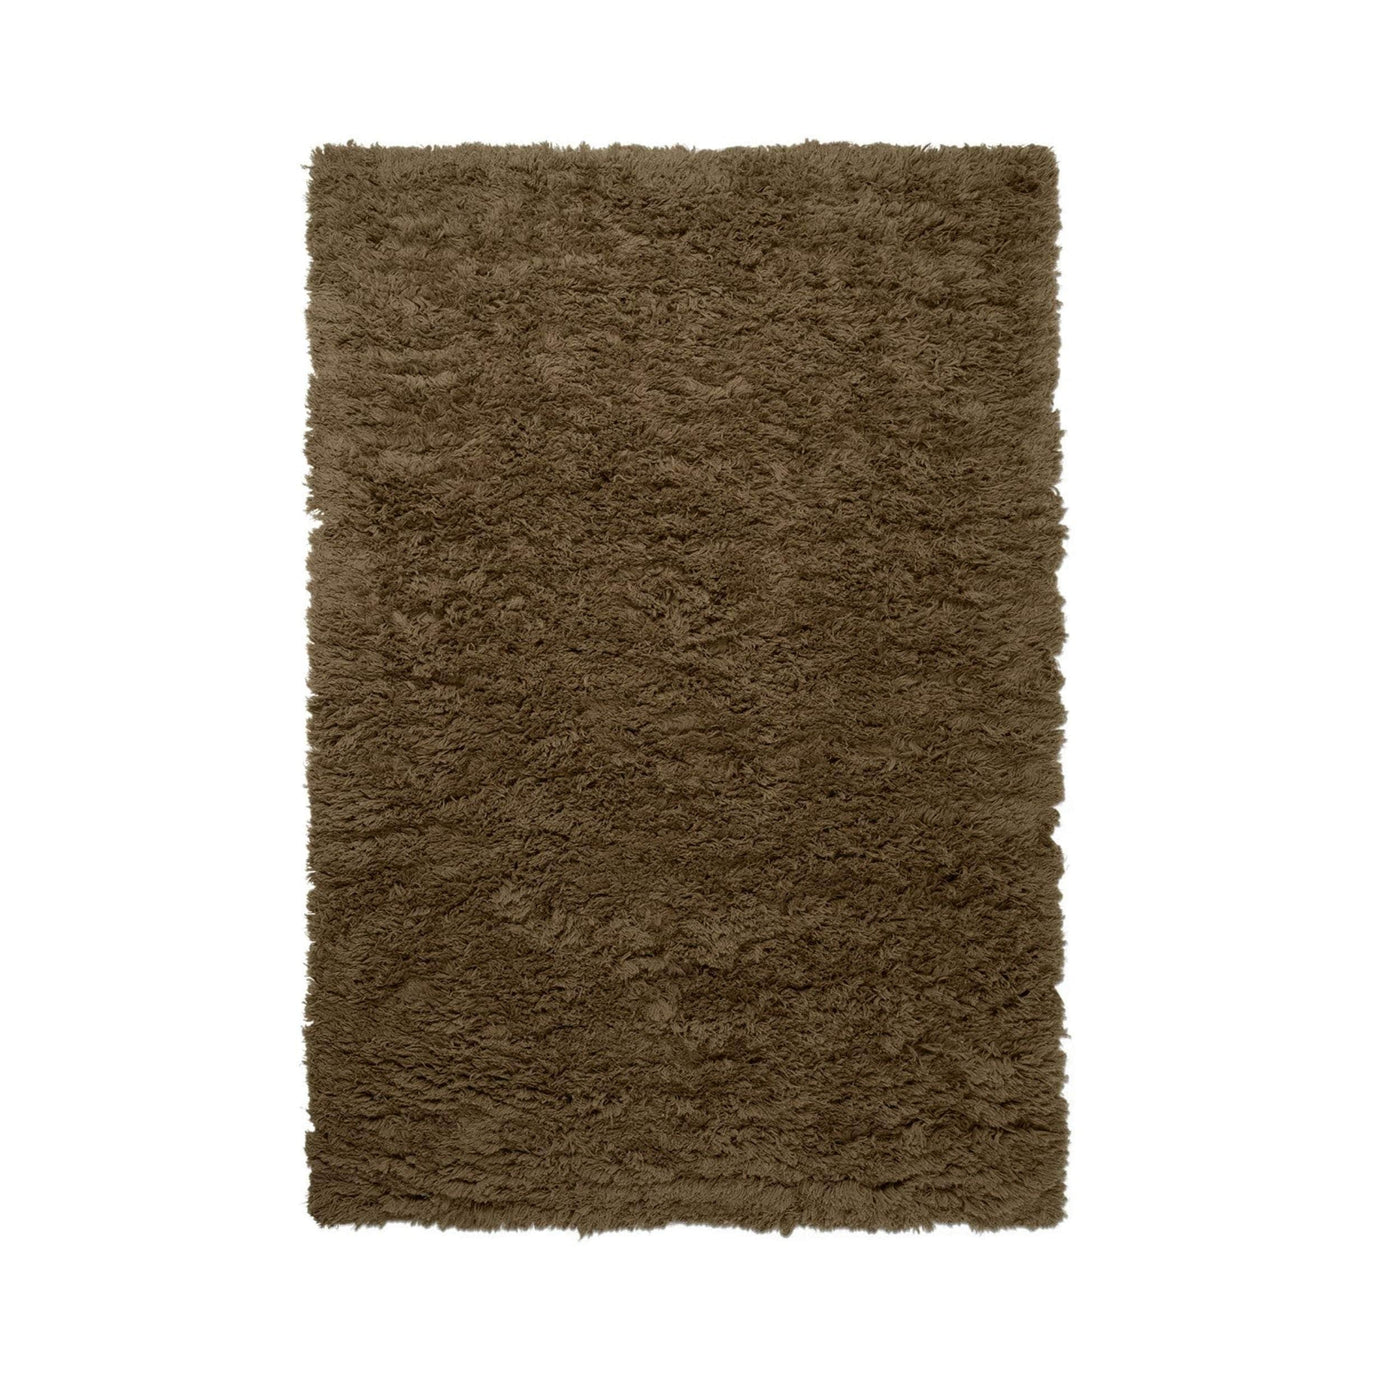 Ferm Living Meadow High Pile rug in tapenade, large size. Shop online at someday designs. #colour_tapenade